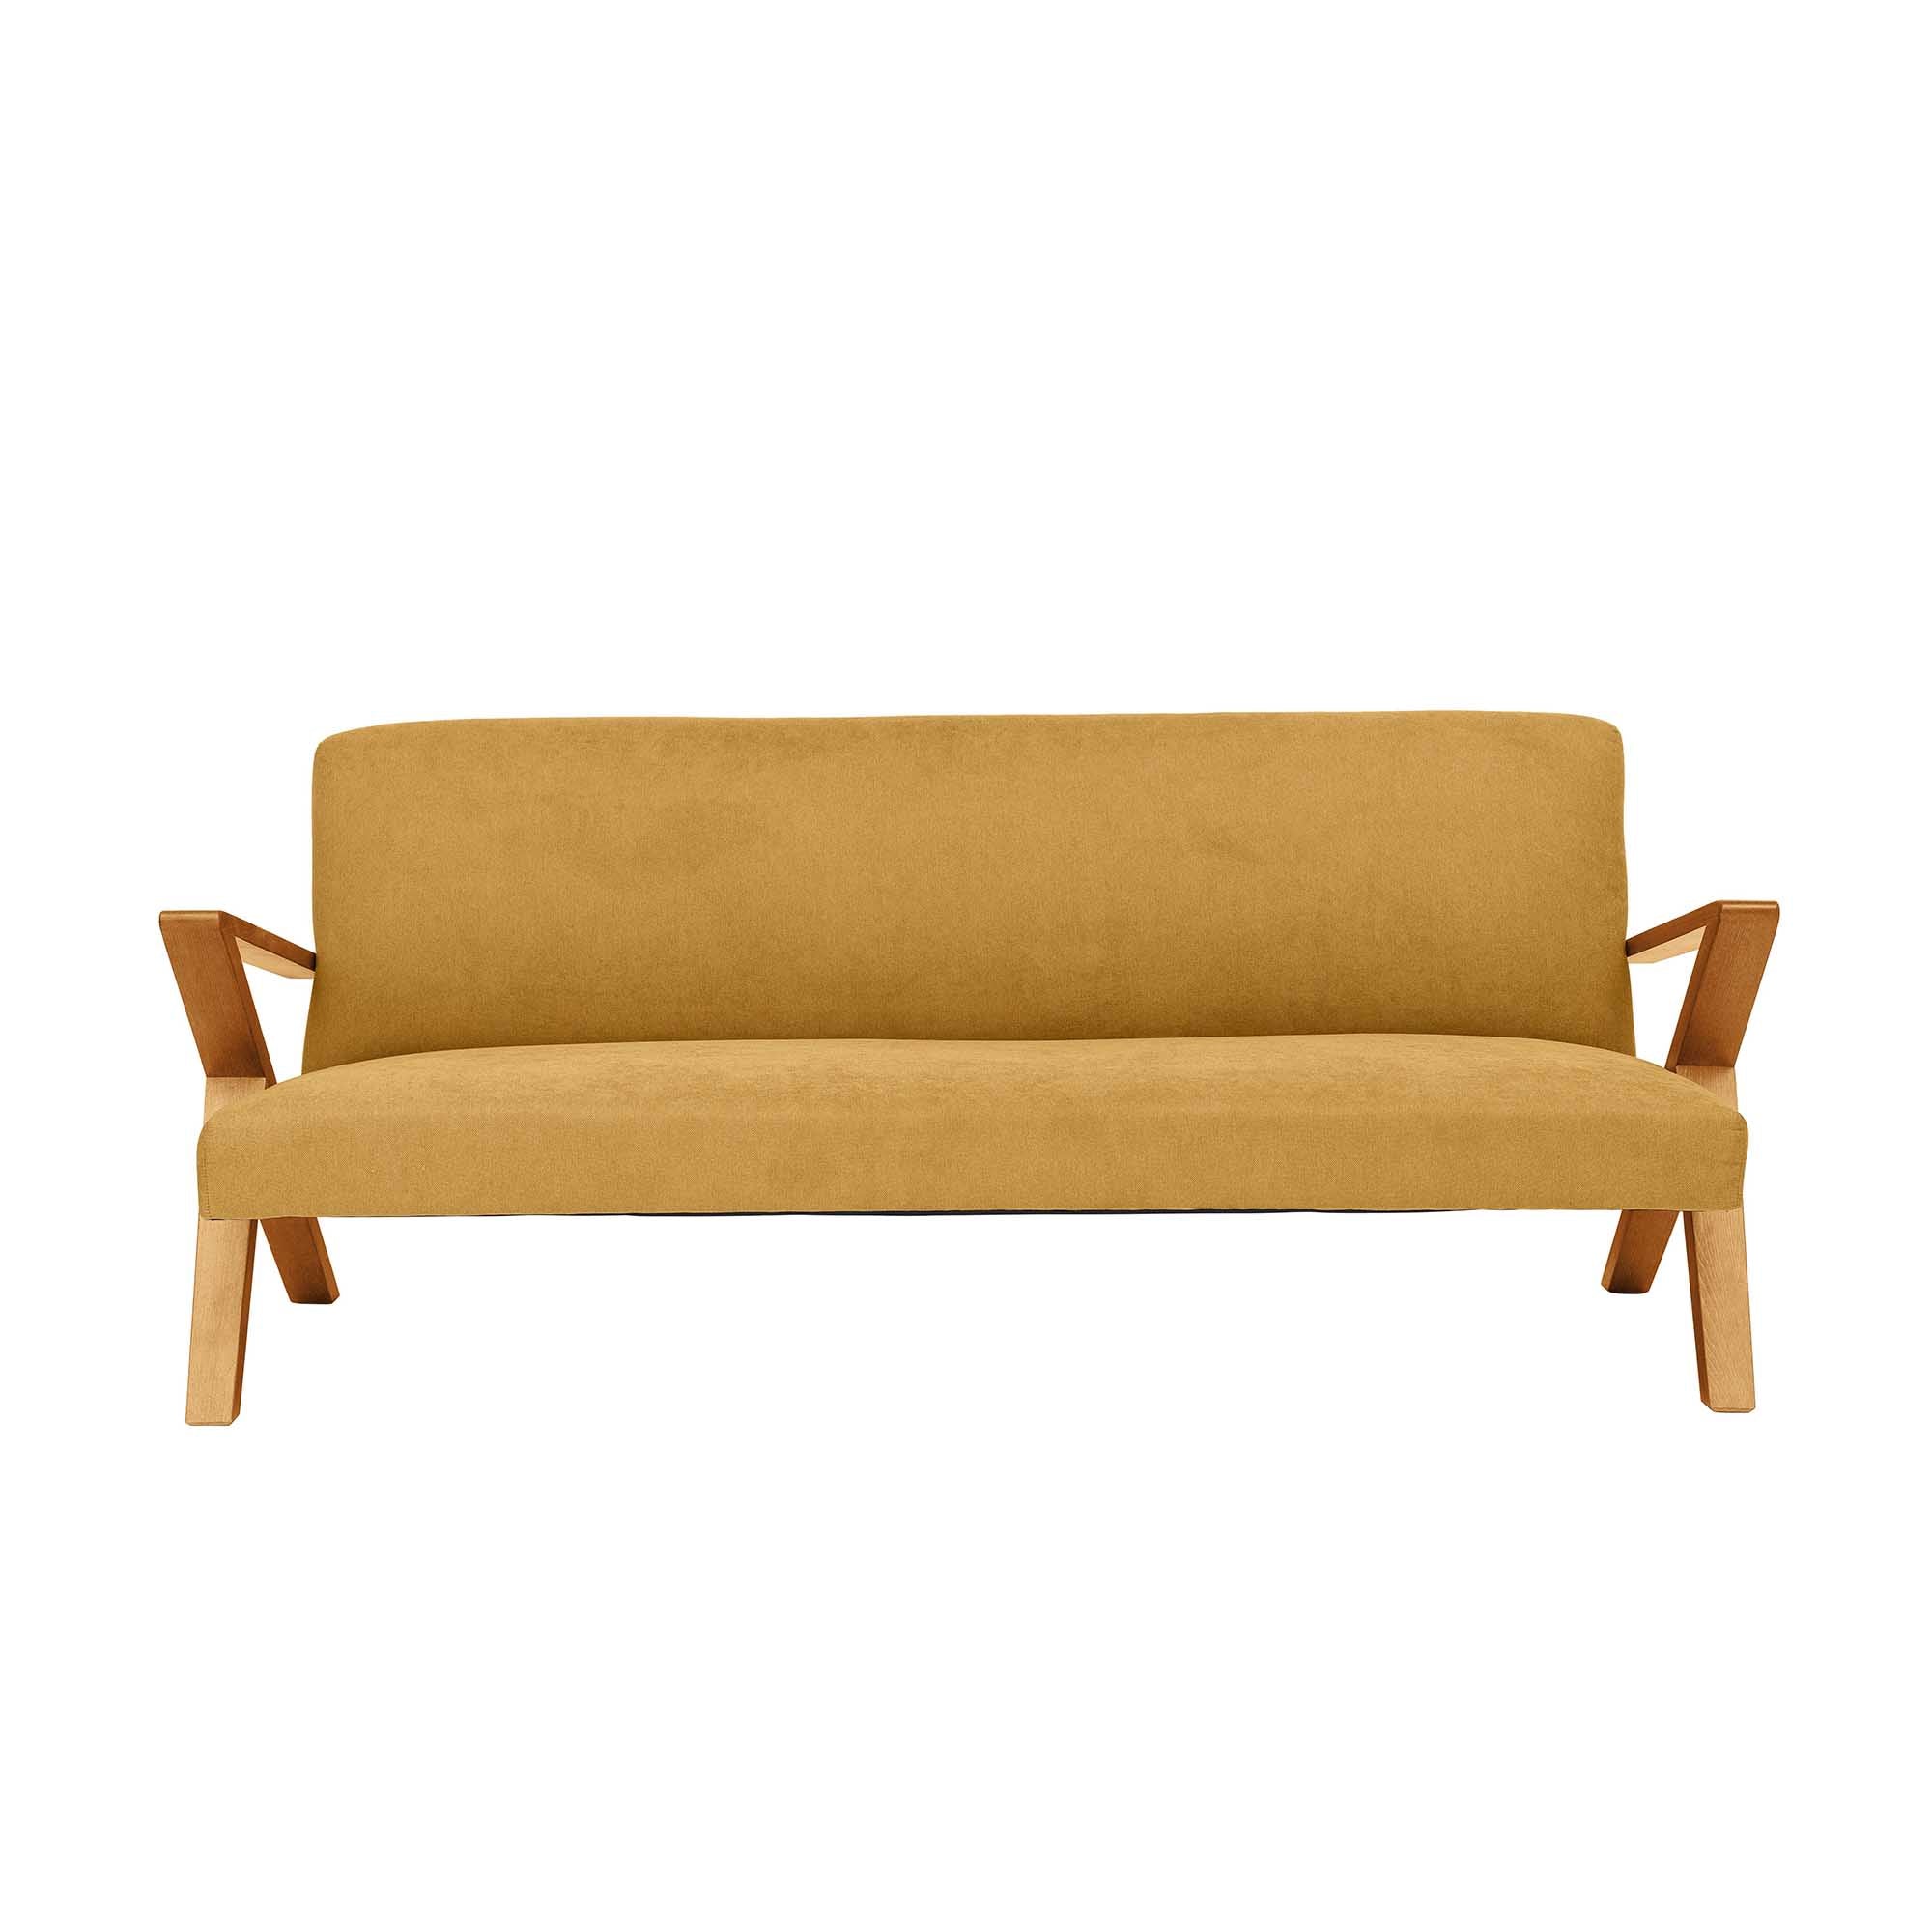 4-seater Sofa Beech Wood Frame, Oak Colour yellow fabric, front view